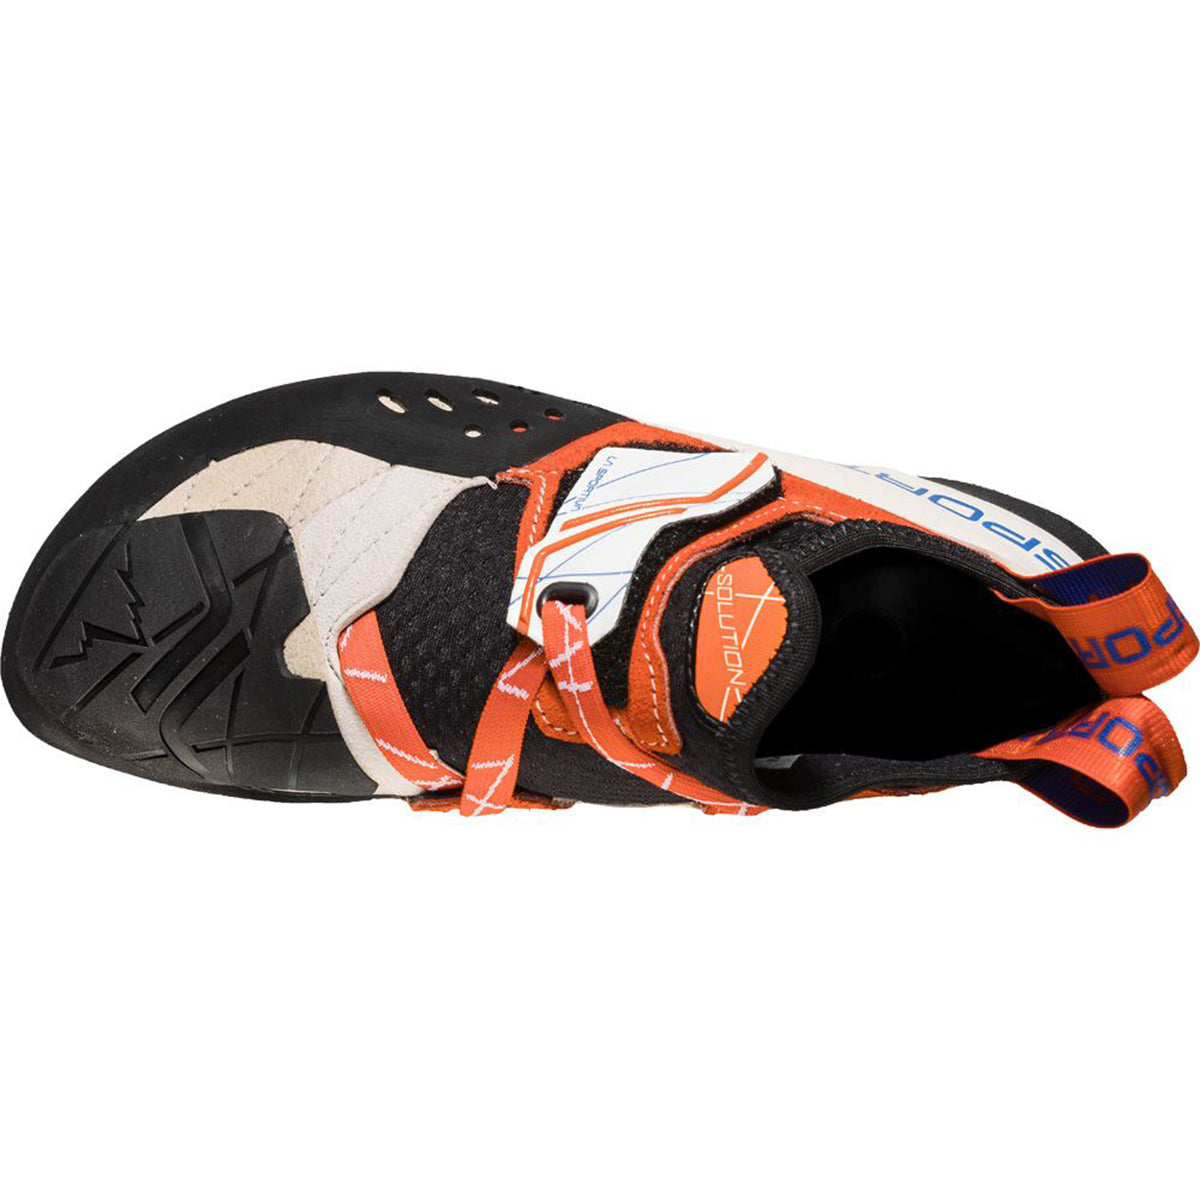 La Sportiva Solution Women&#39;s climbing shoe in a White Lilly colour as seen from above.